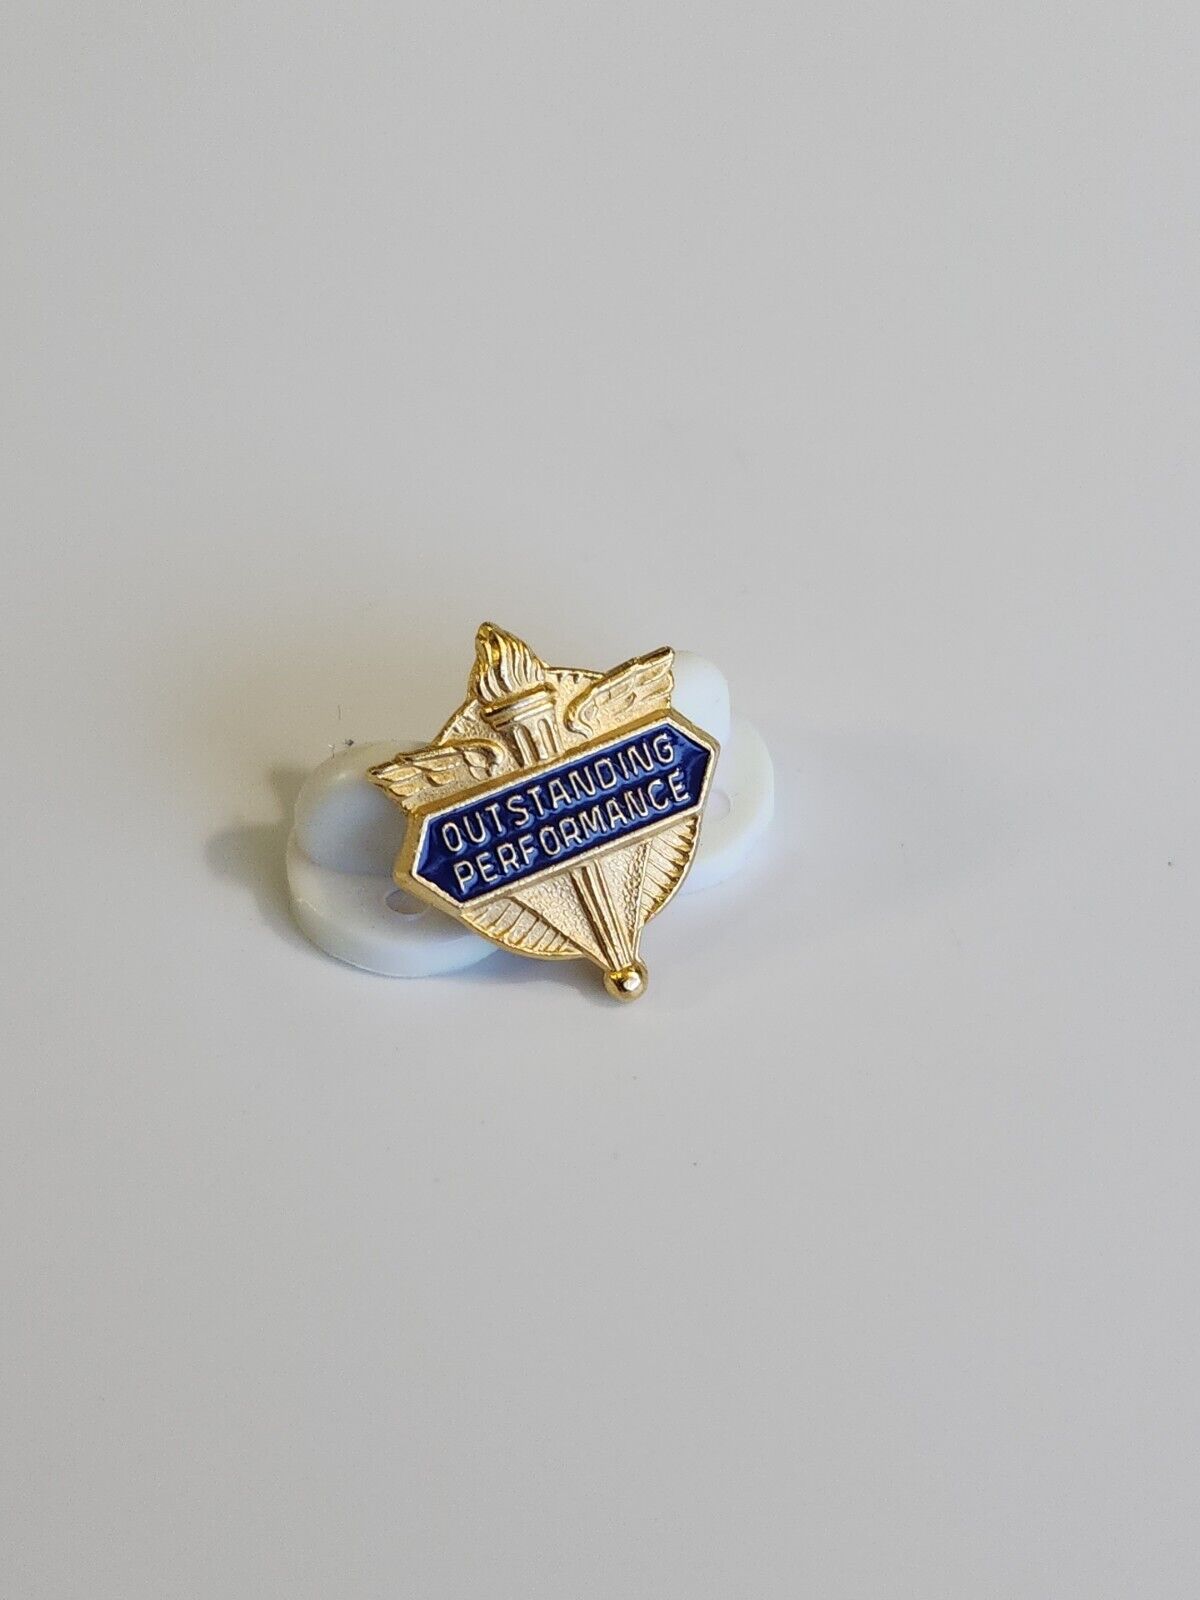 Outstanding Performance Recognition Award Lapel Pin Small Blue & Gold Color